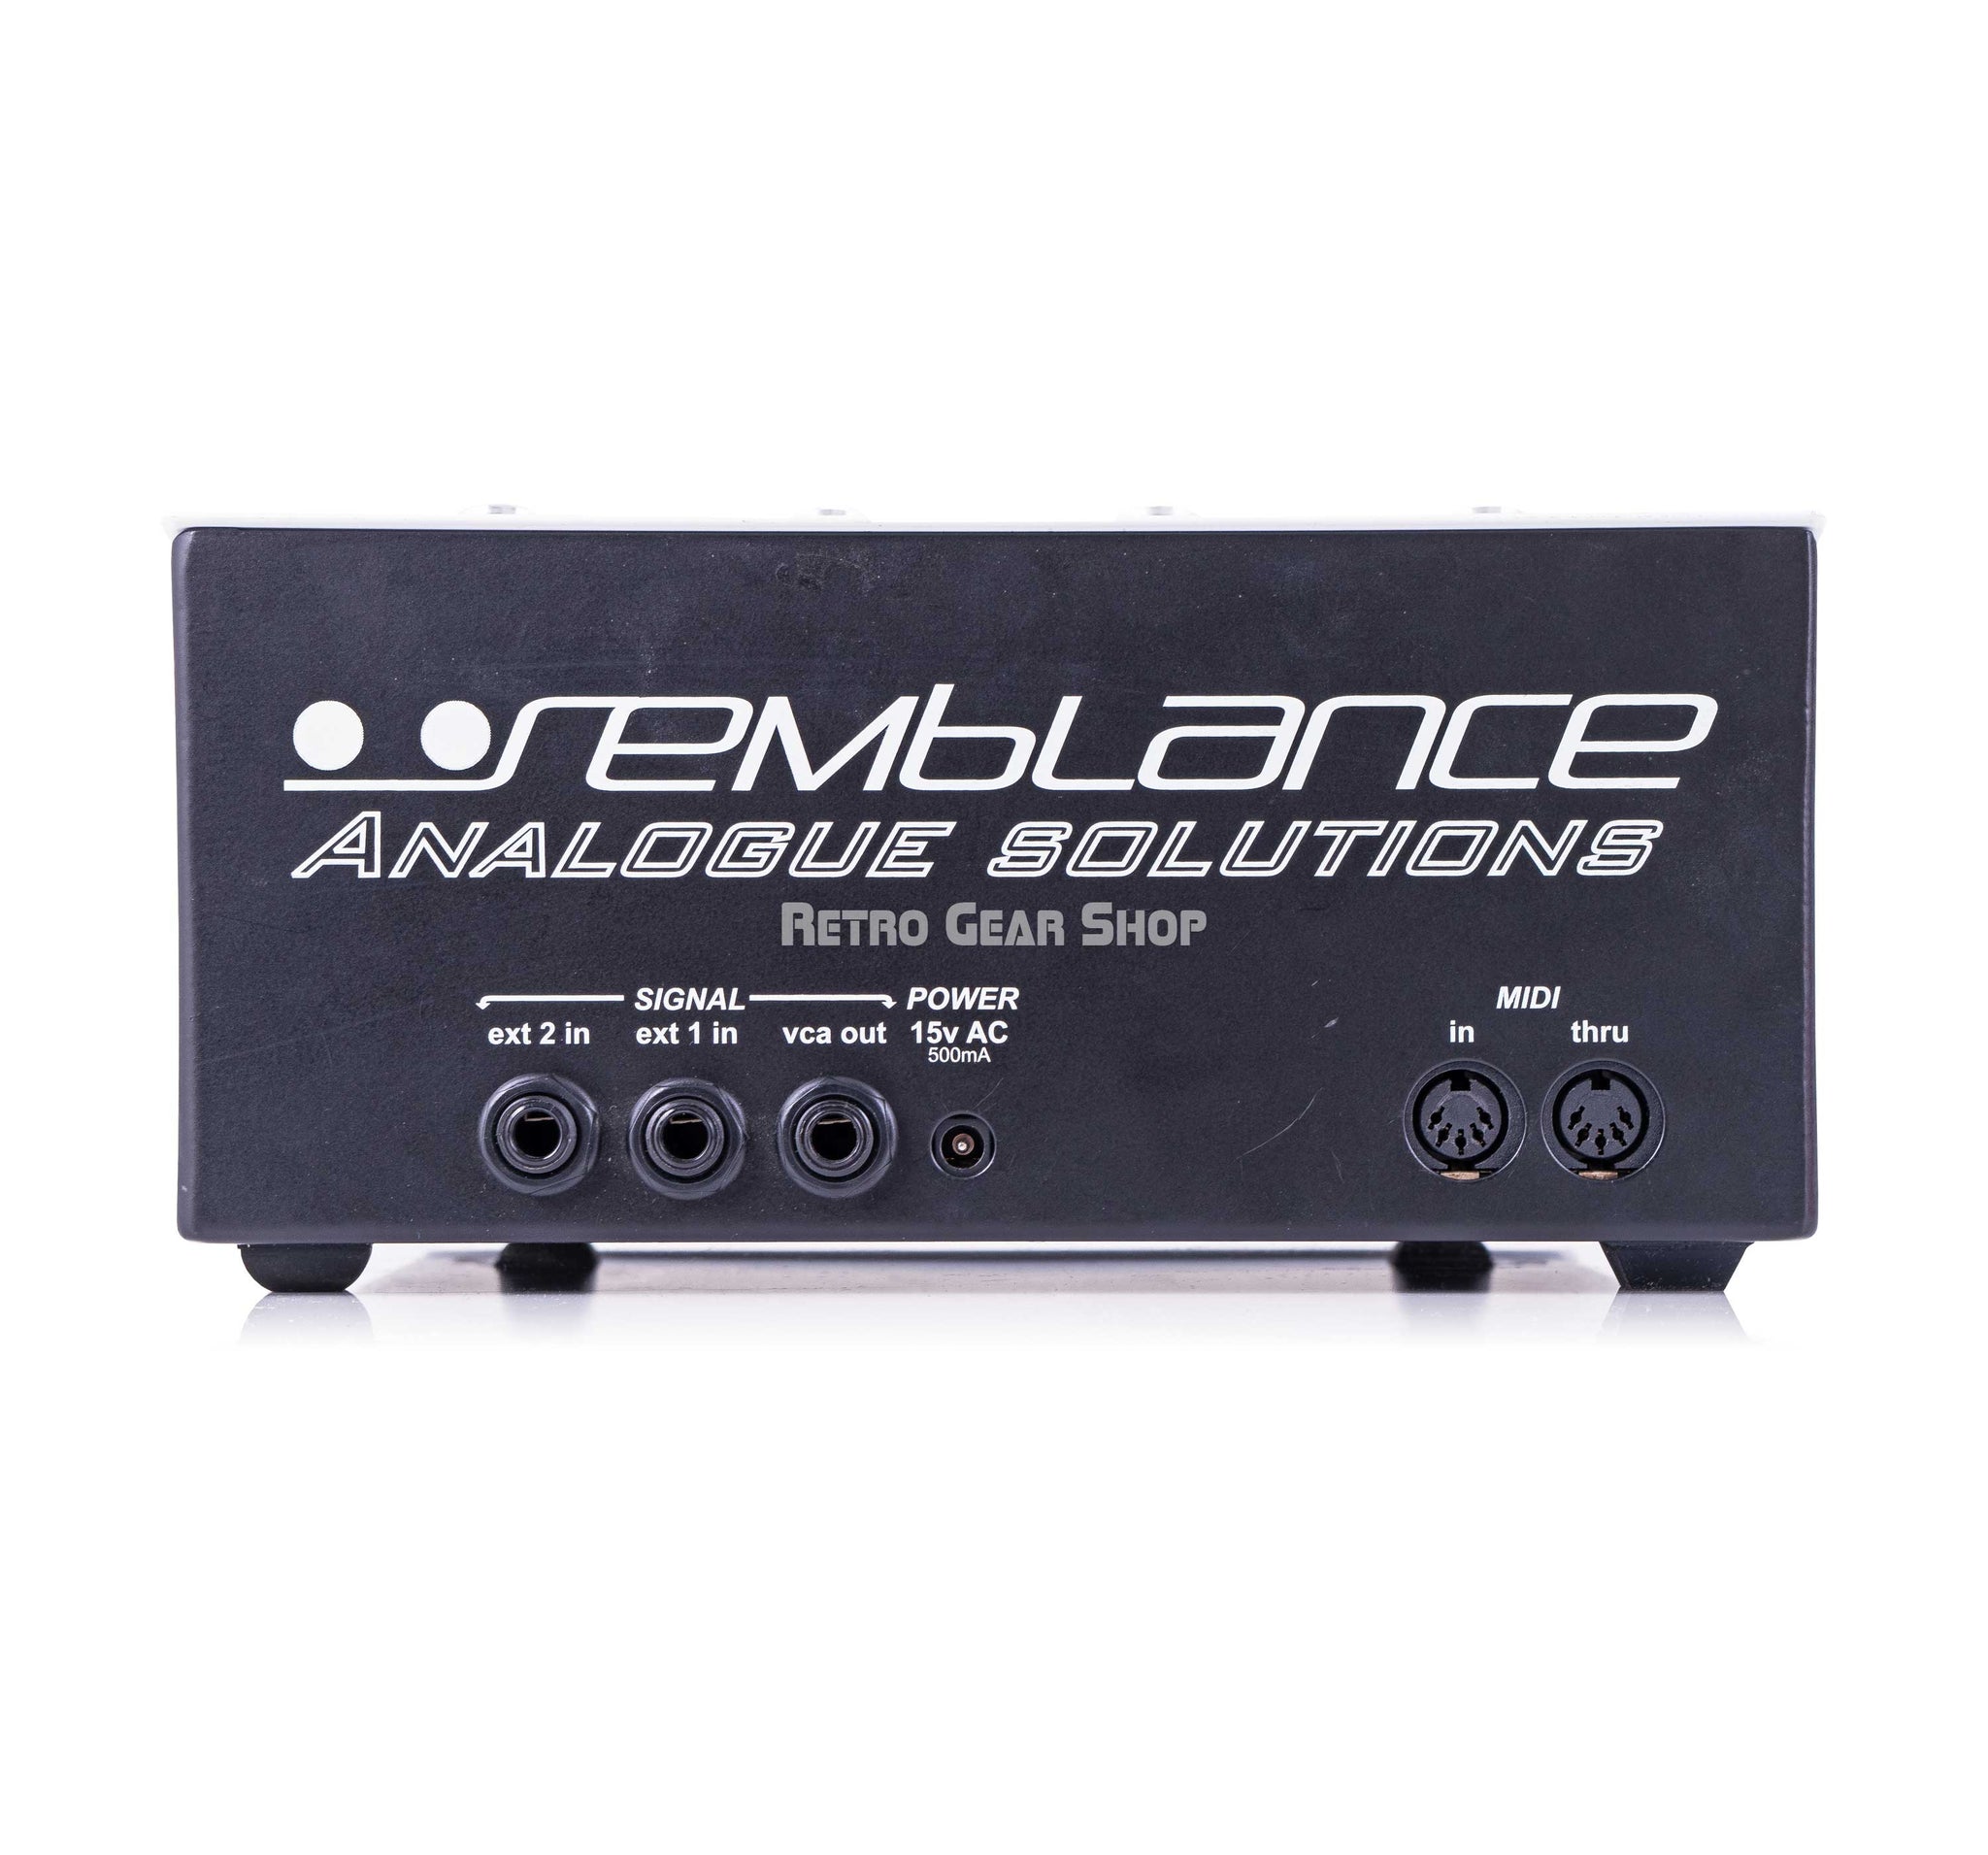 Analogue Solutions Semblance Rear